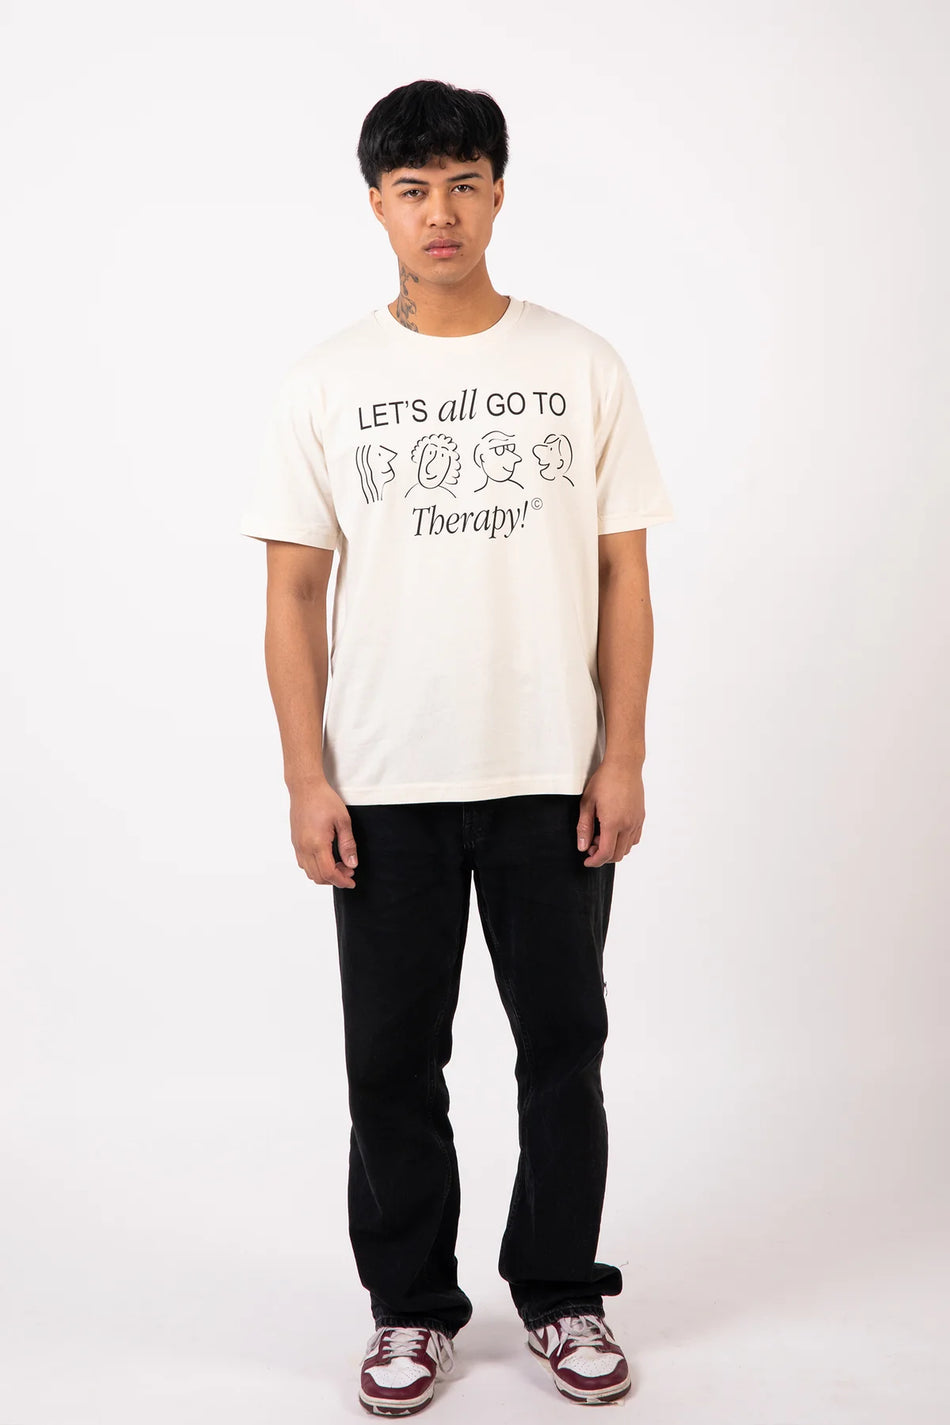 TPG – Catharsis LET'S ALL GO TO THERAPY – T-Shirt cream